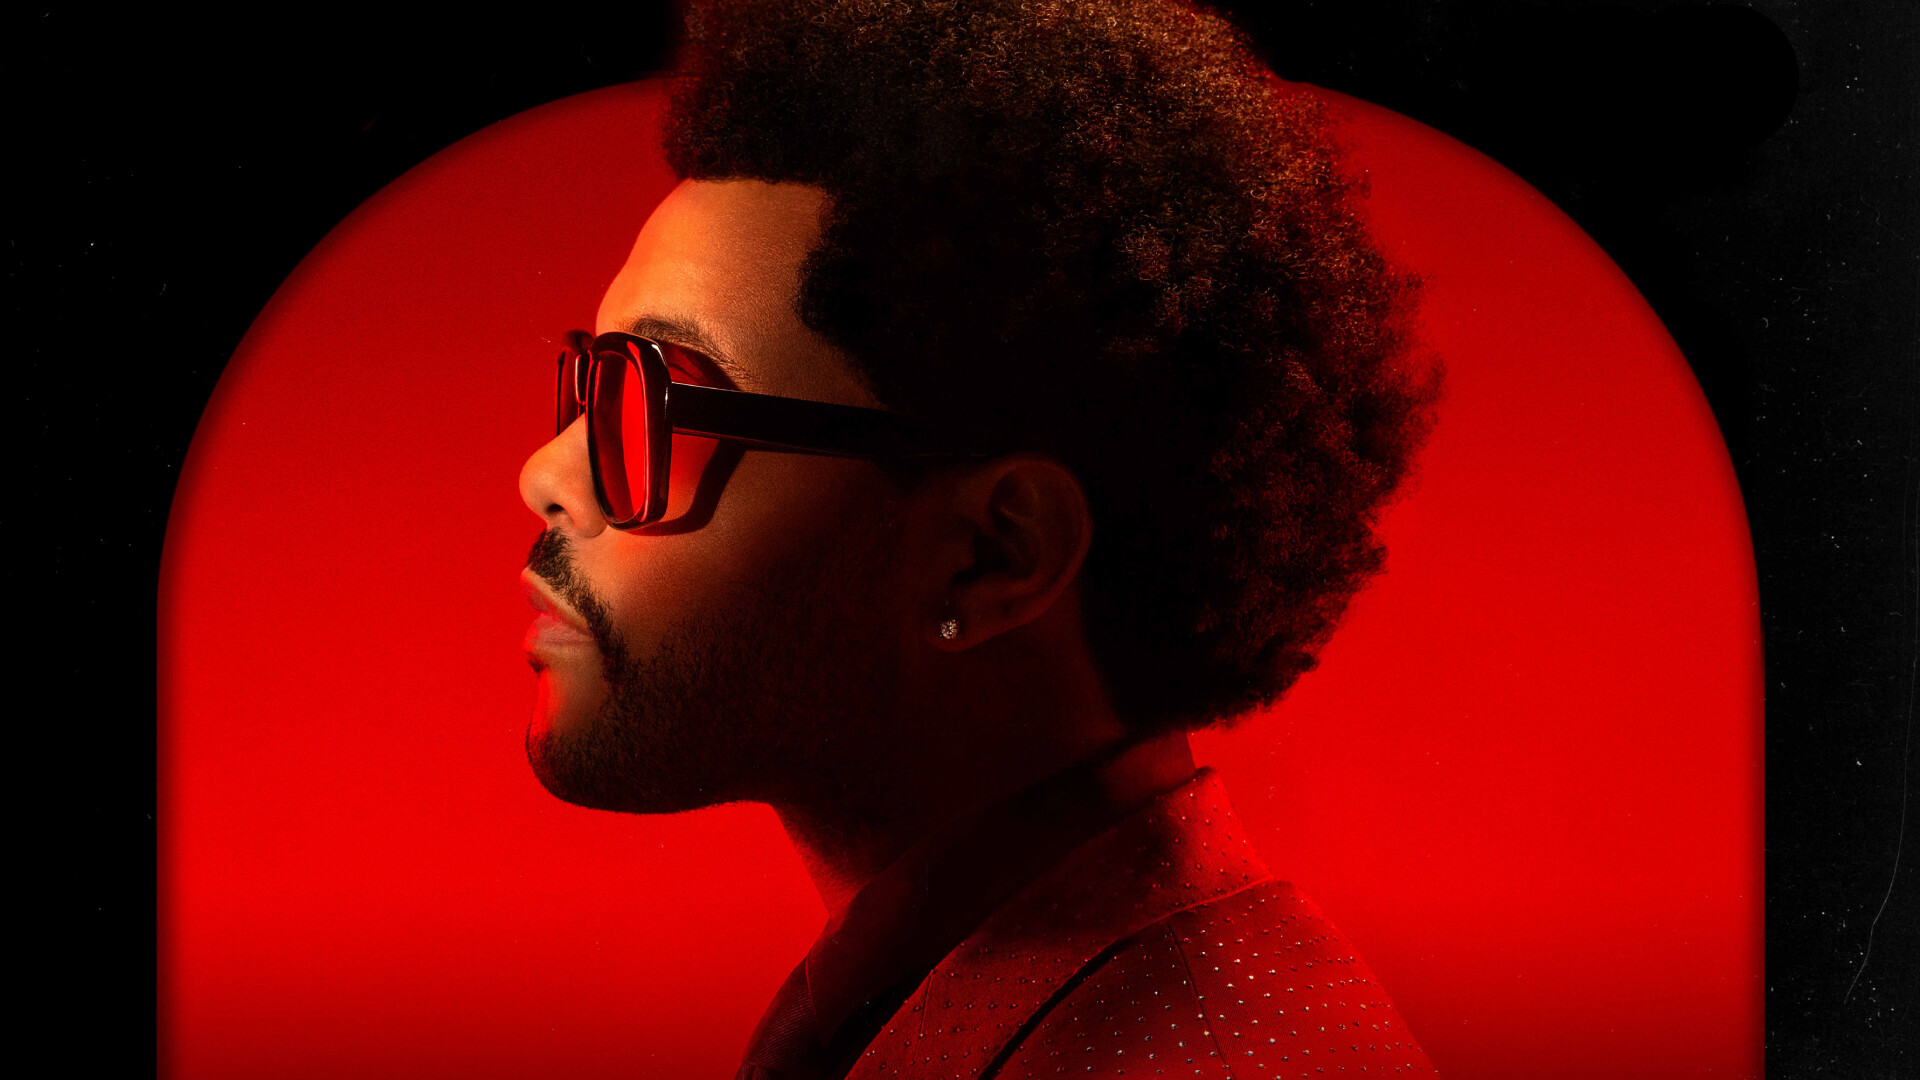 The Weeknd: After Hours, Debuted atop the Billboard 200, earning 444,000 units. 1920x1080 Full HD Wallpaper.